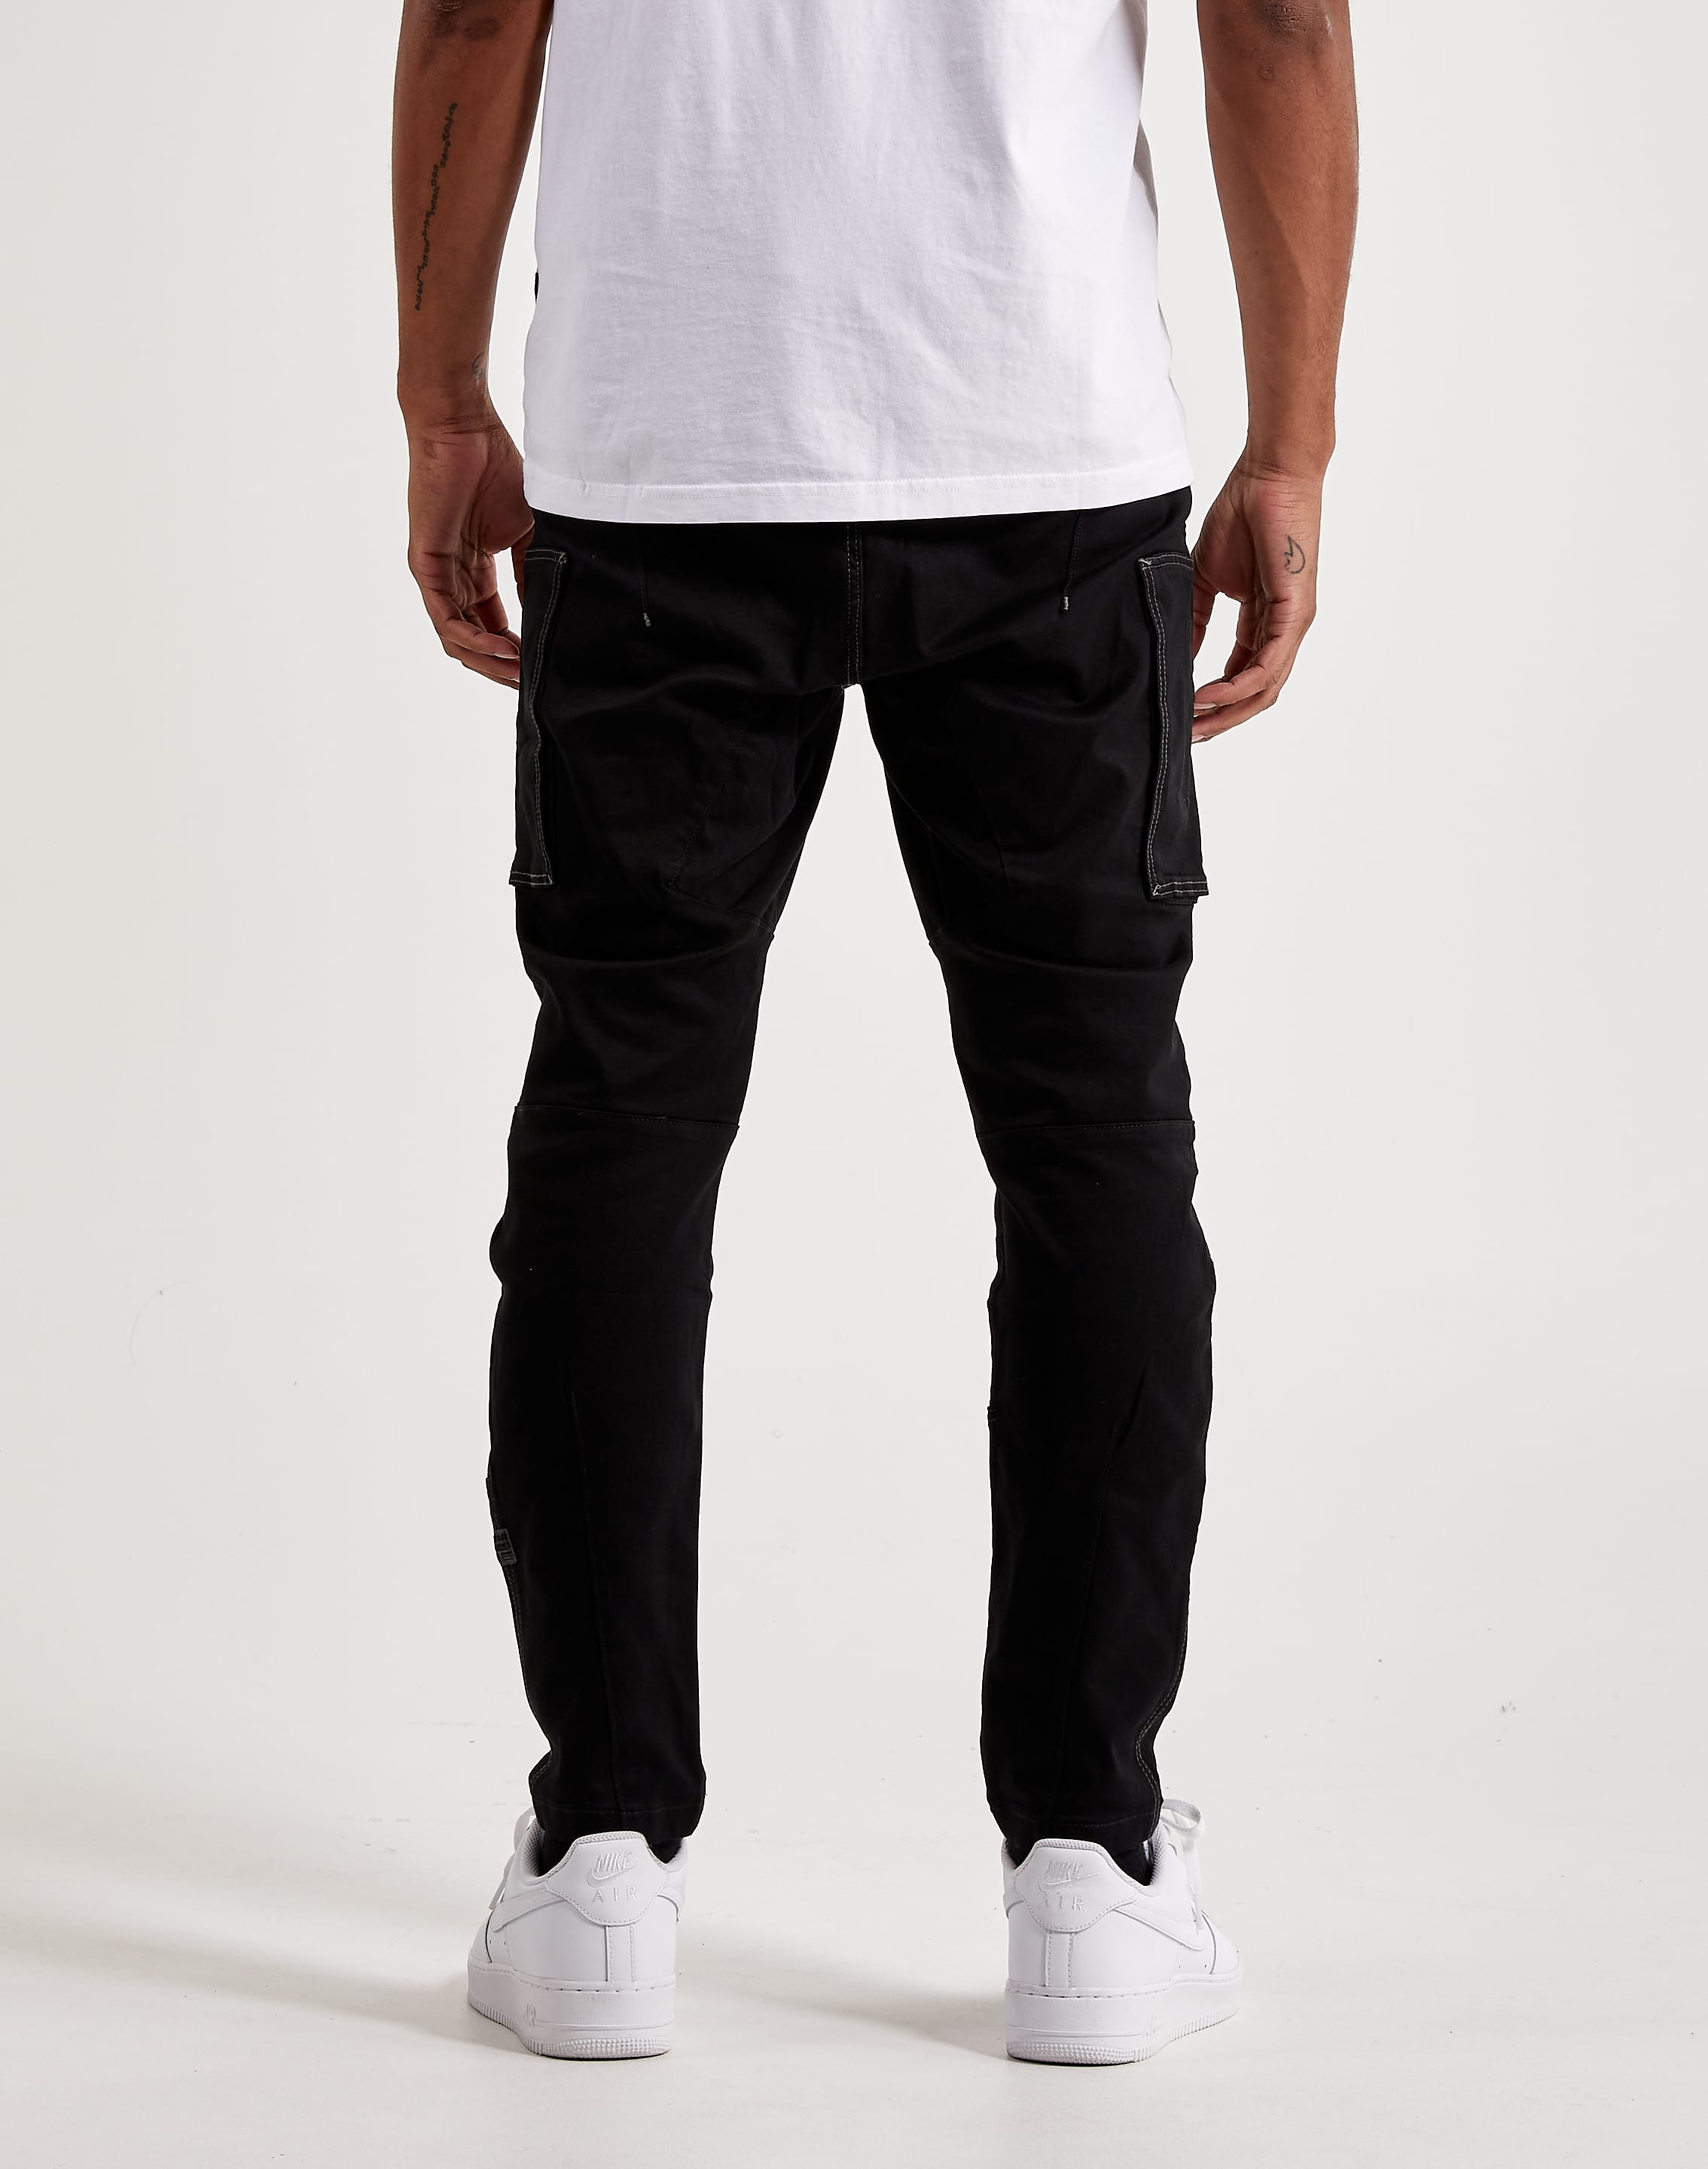 G Star Raw Cargo Pants at Rs 400/piece | Cargo Pant for Men in Bengaluru |  ID: 2853271911433